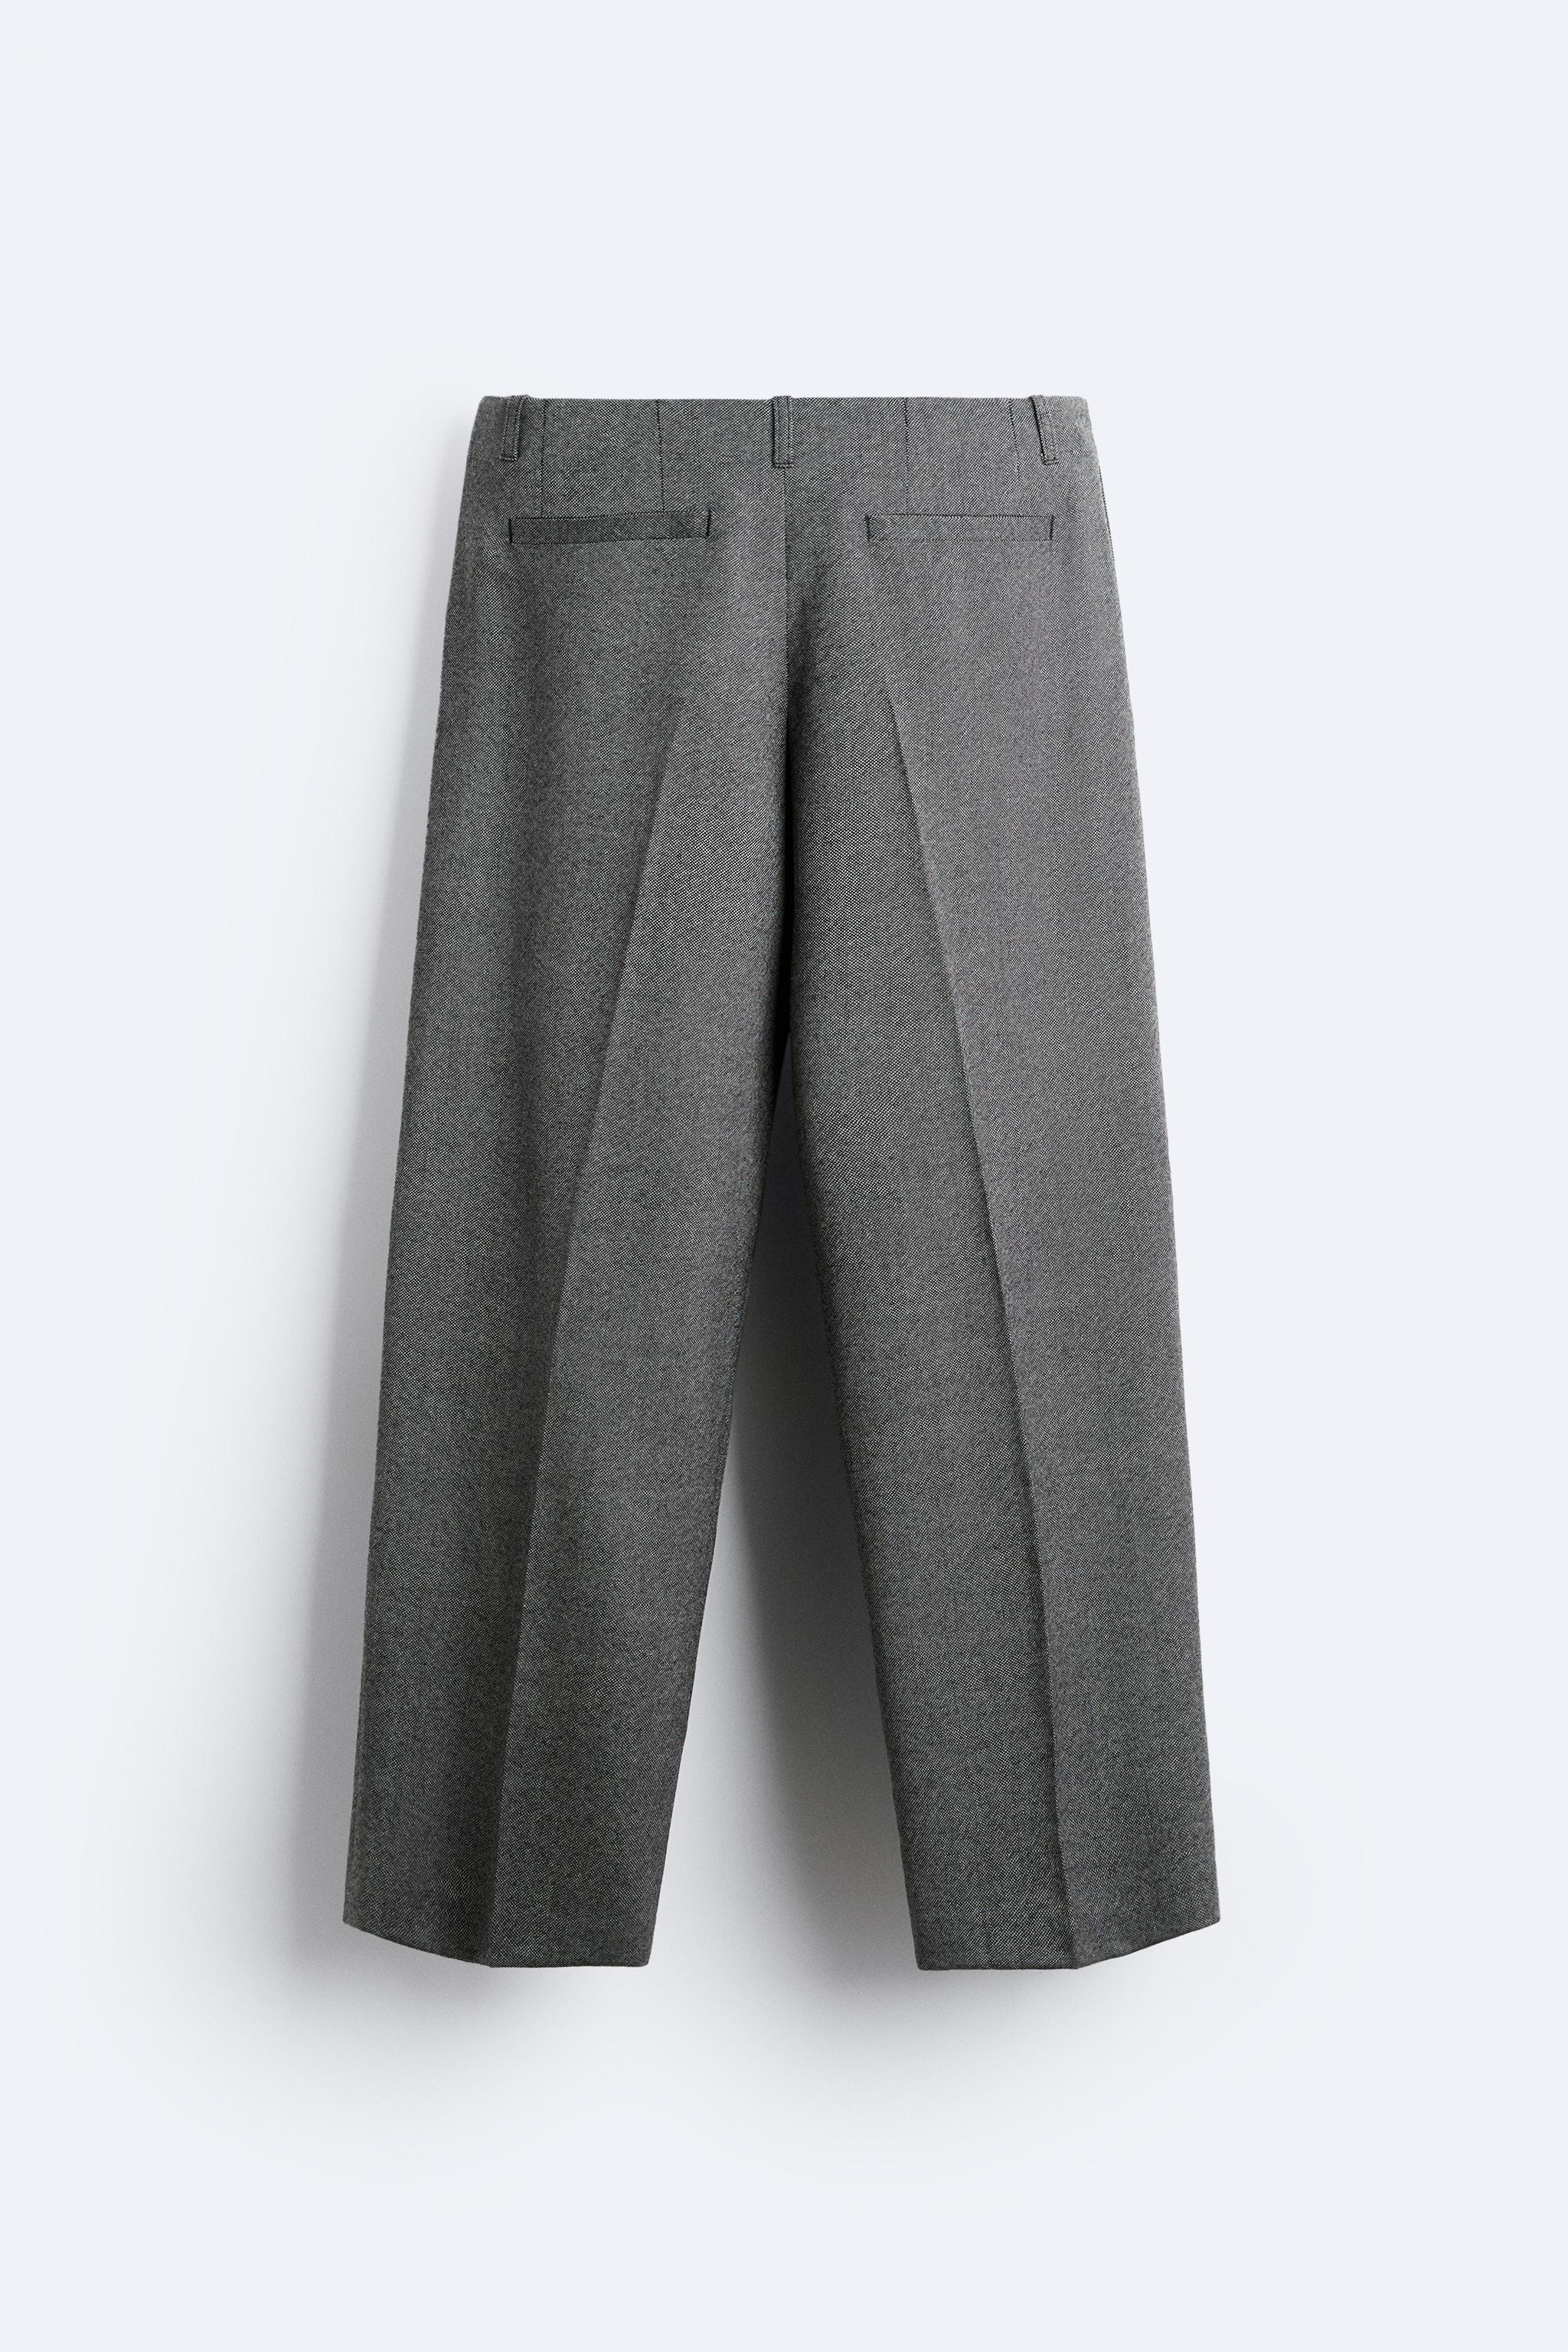 WOOL SUIT PANTS LIMITED EDITION